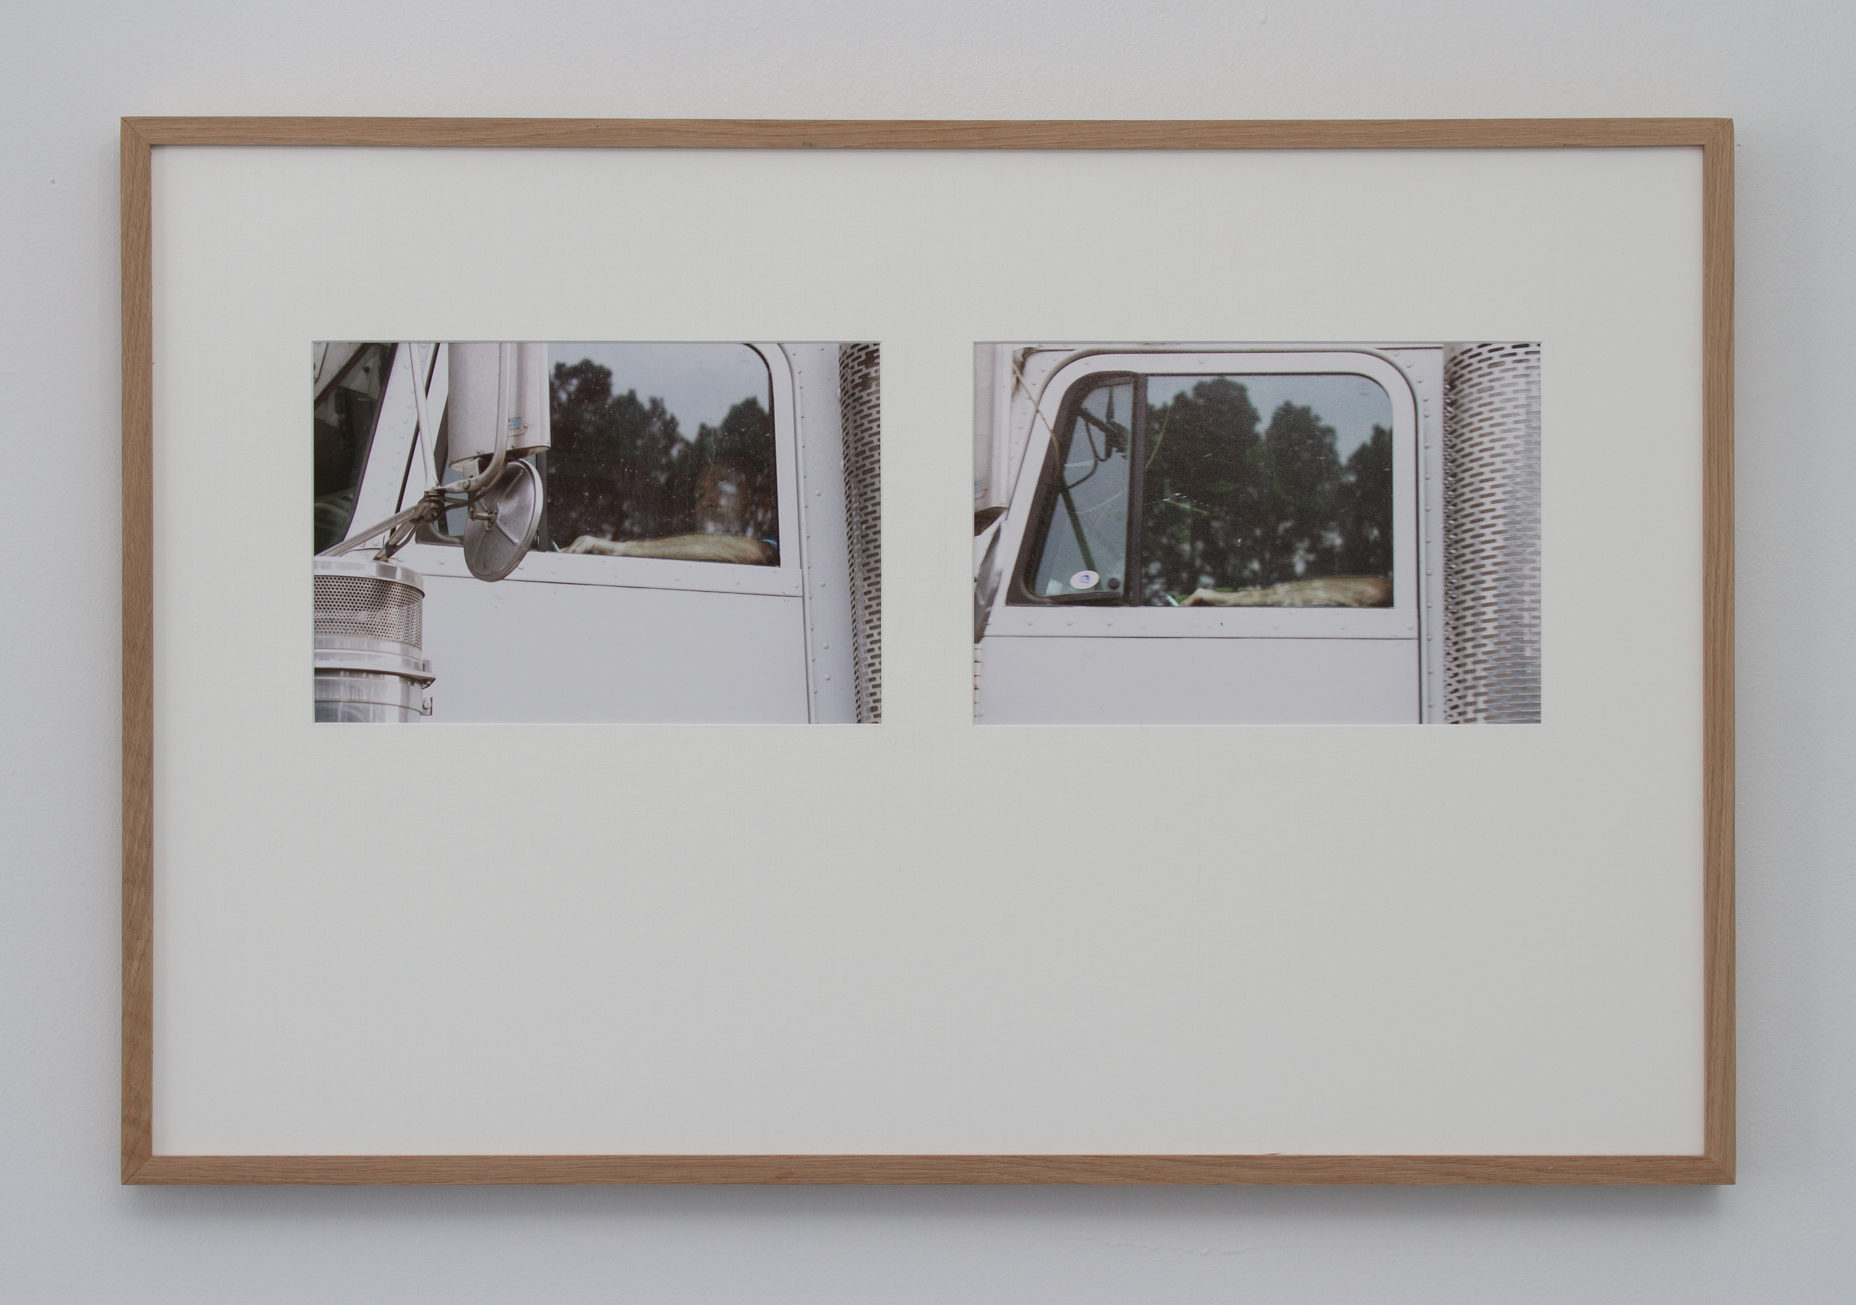 Two images of the same truck window side by side in a frame. The photo on the left is angled upwards towards the window while the photo on the left is straight on.